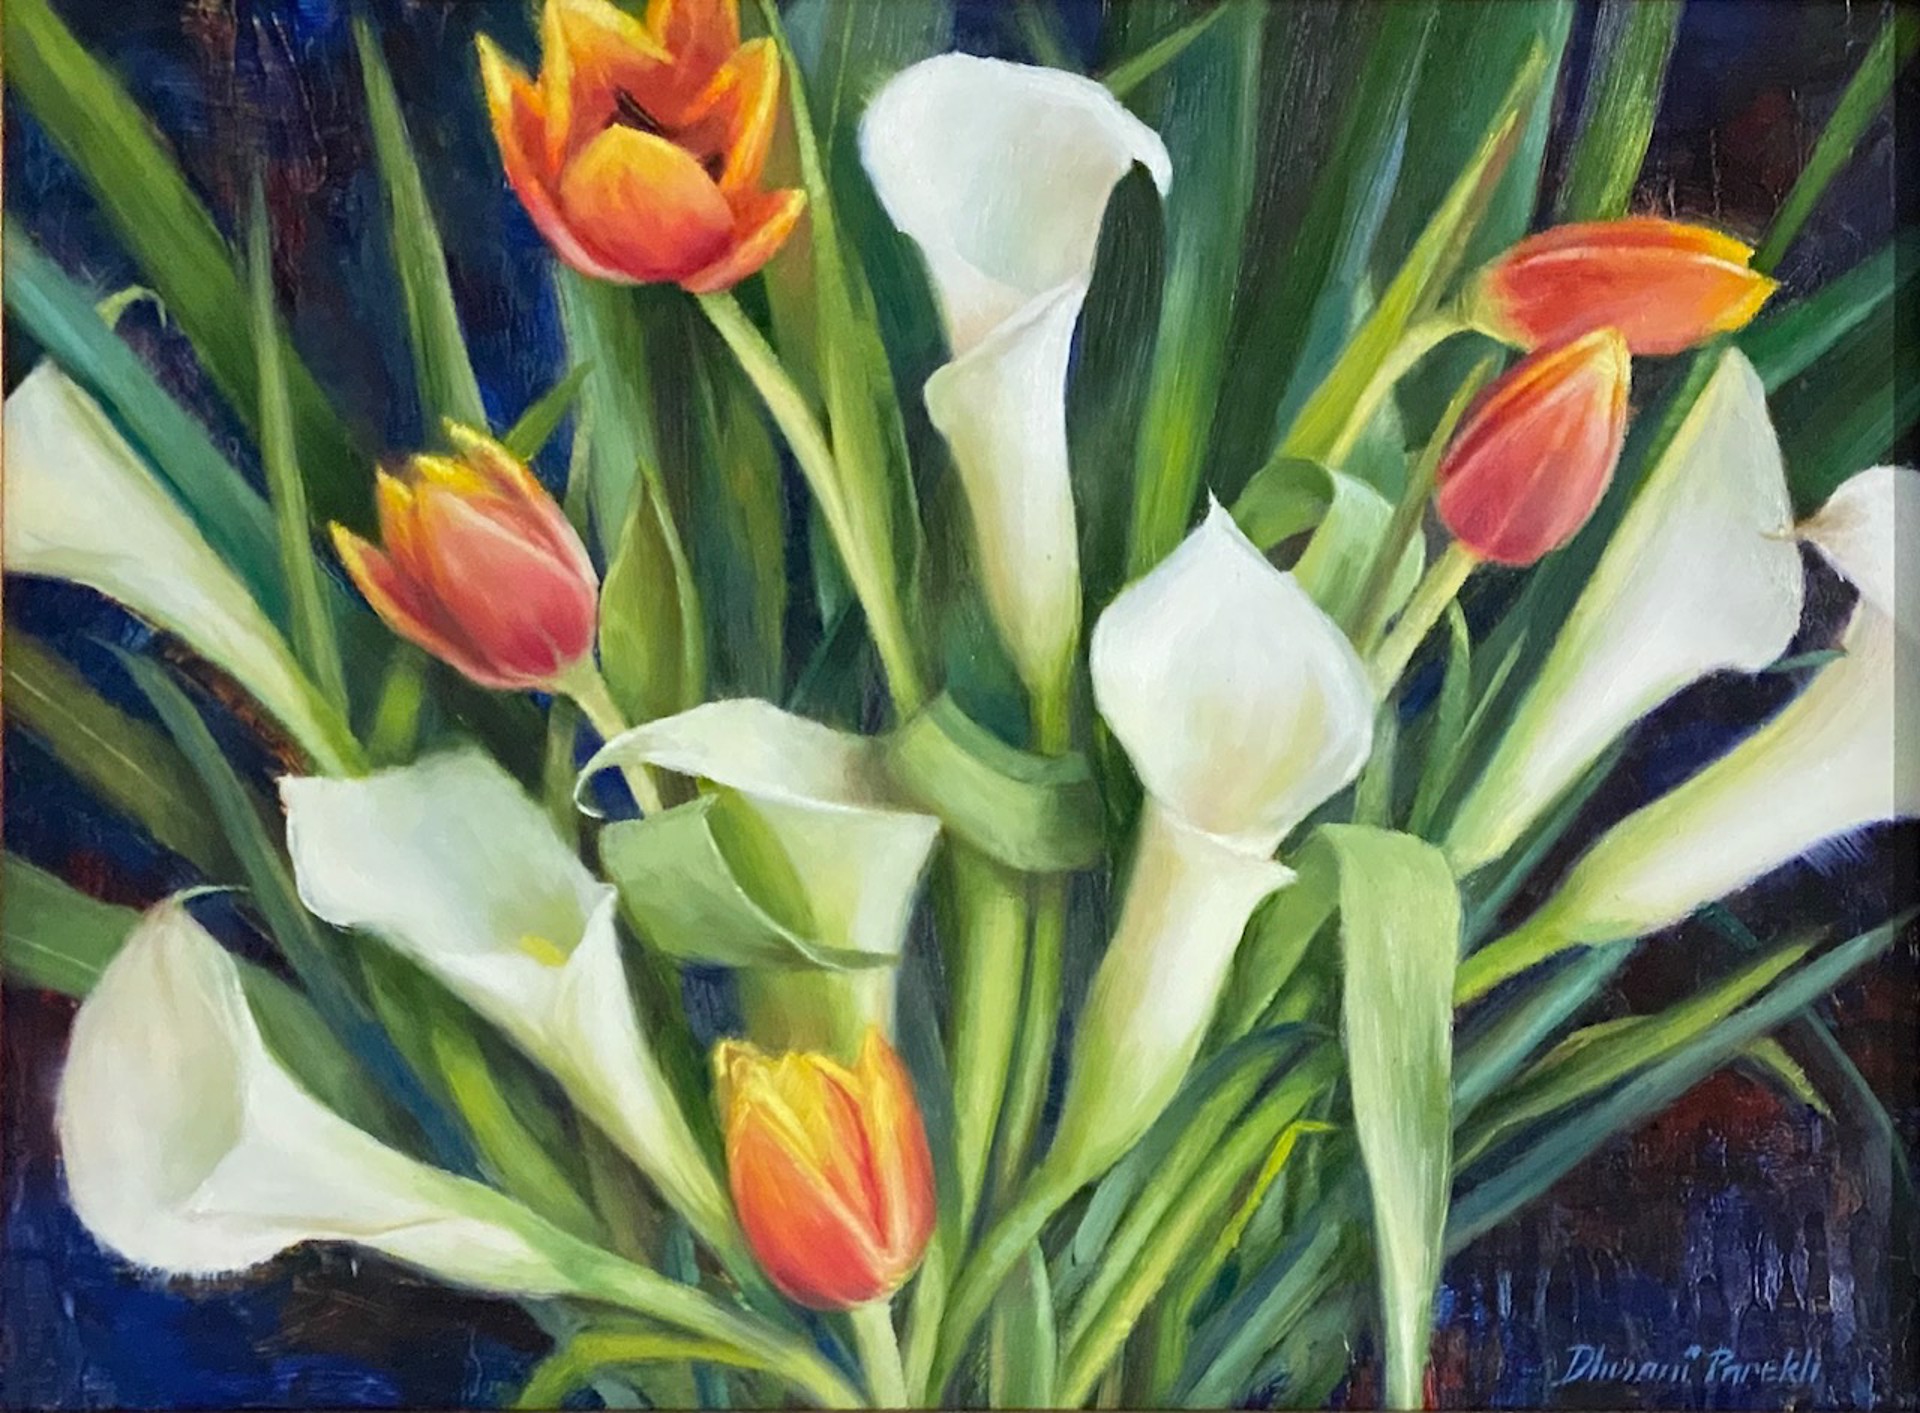 Lilies and Tulips by Dhwani Parekh